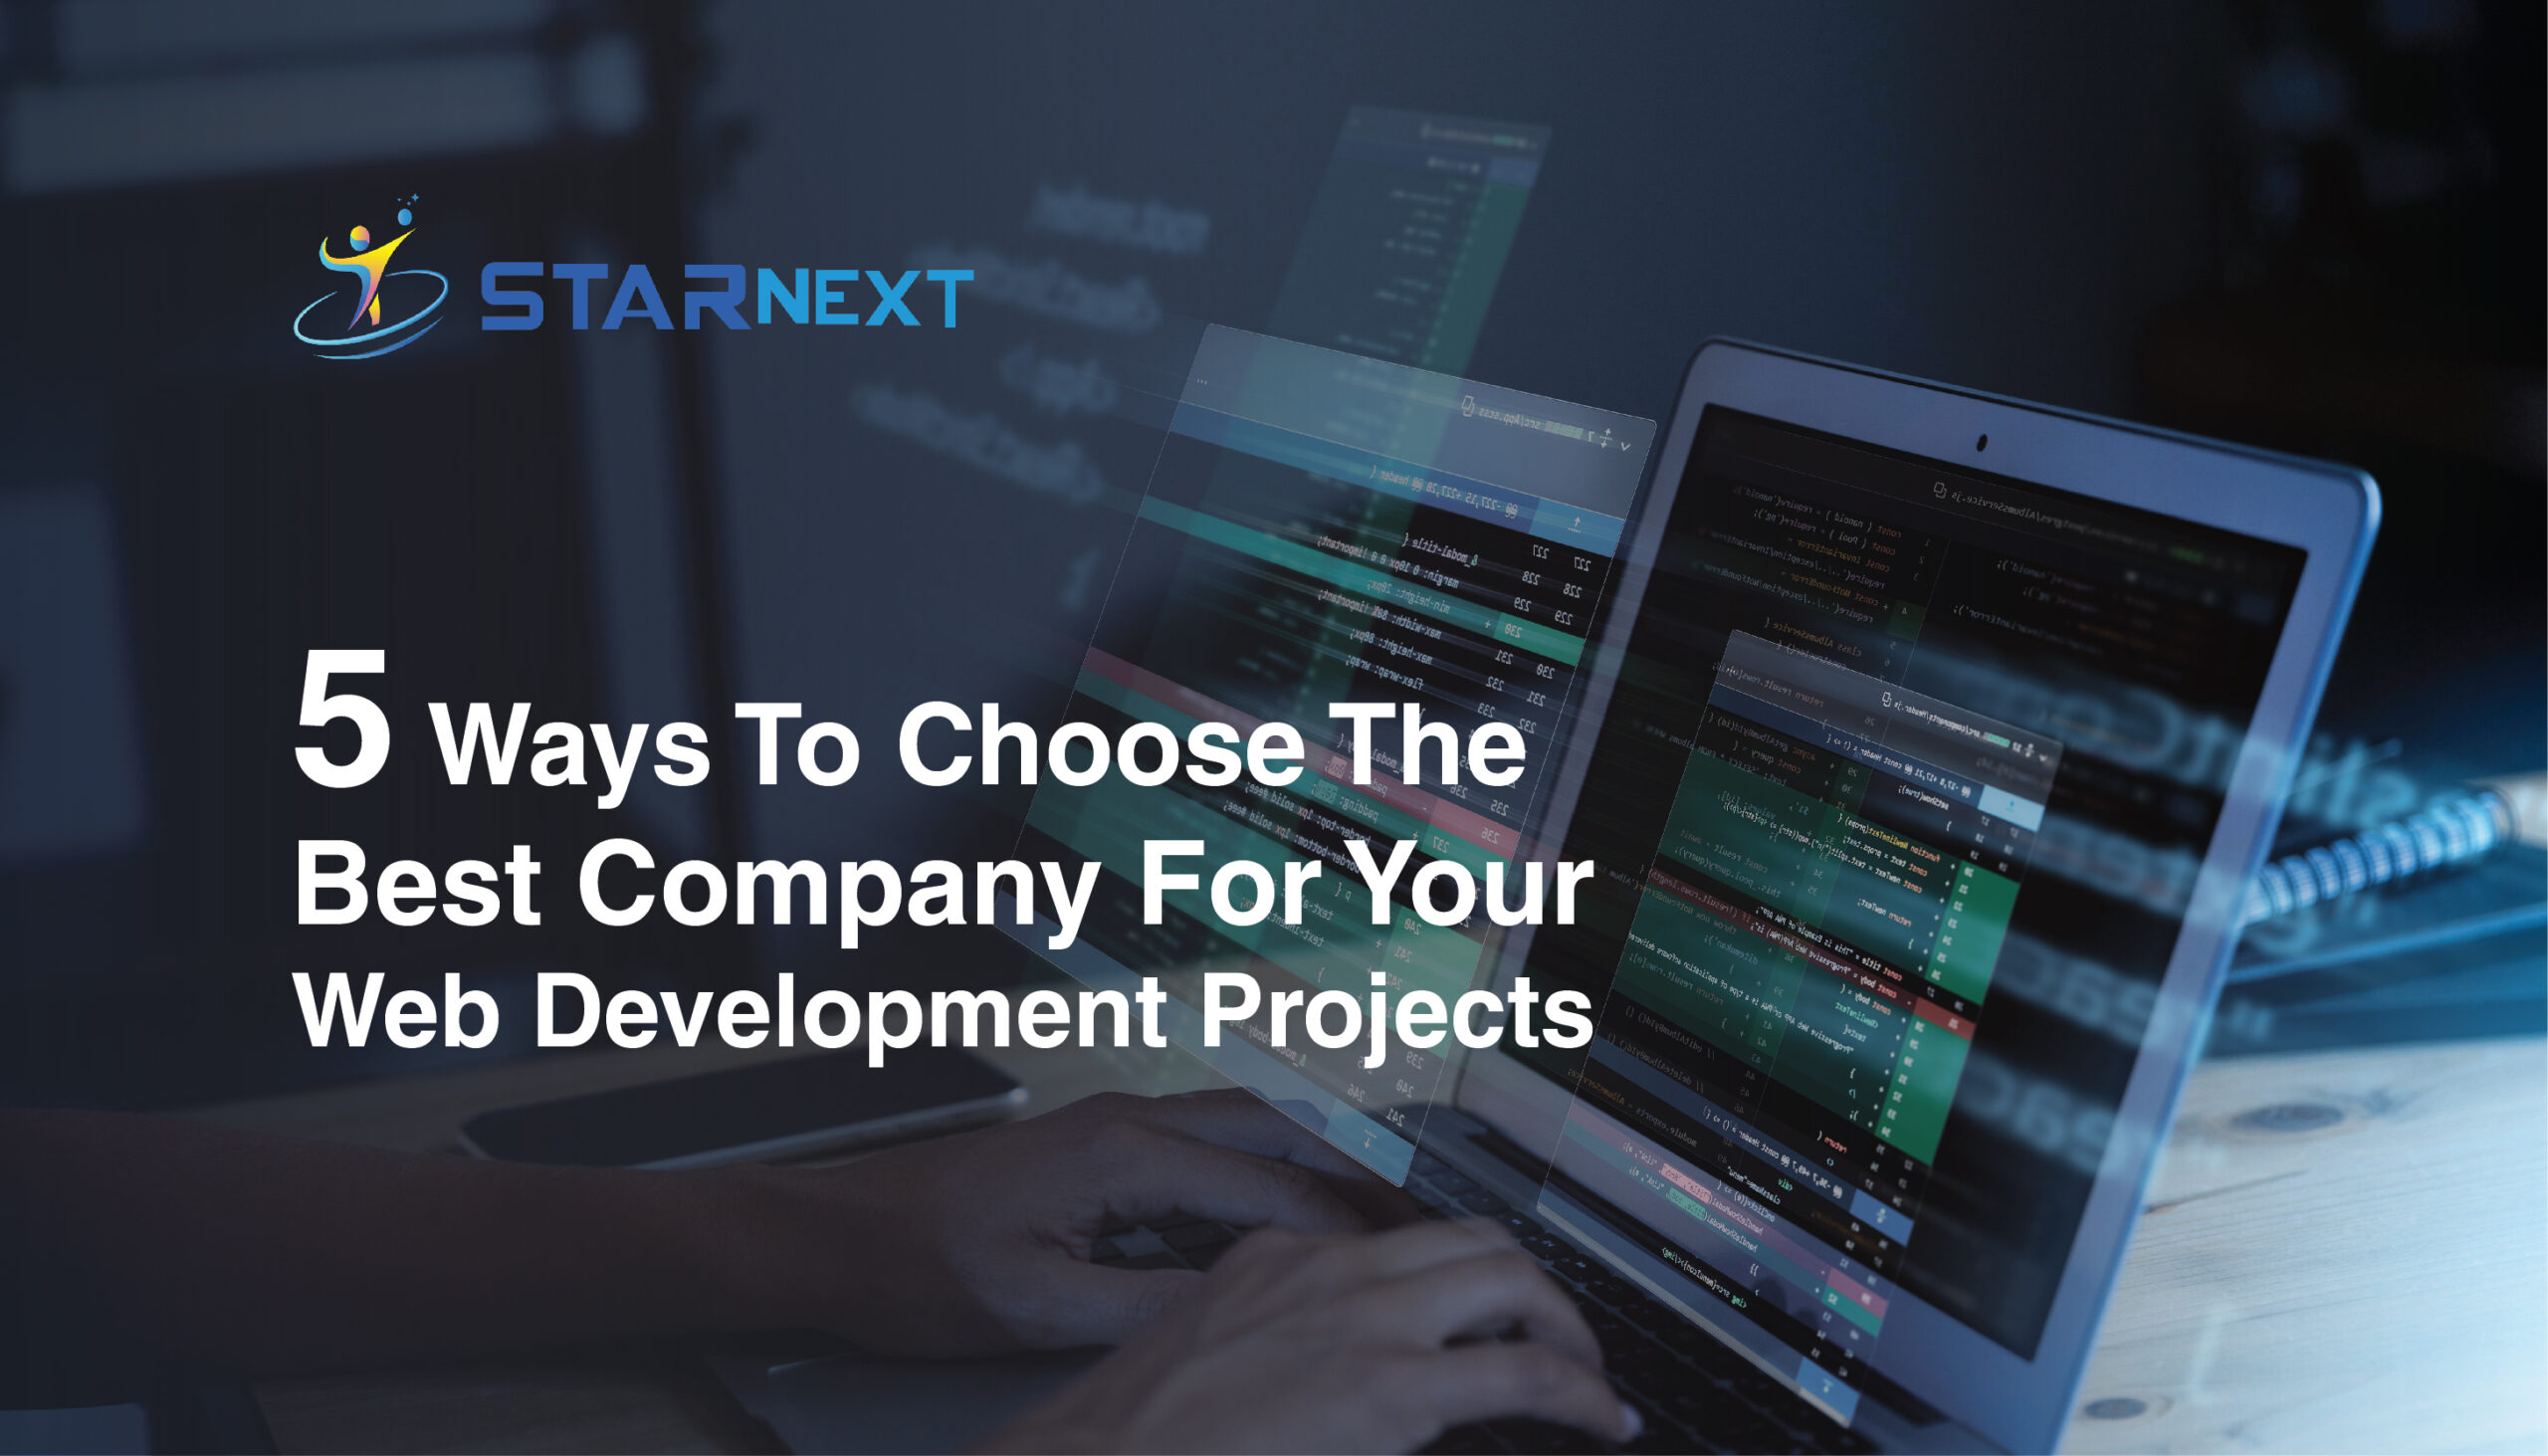 5 Ways To Choose The Best Company For Your Web Development Projects